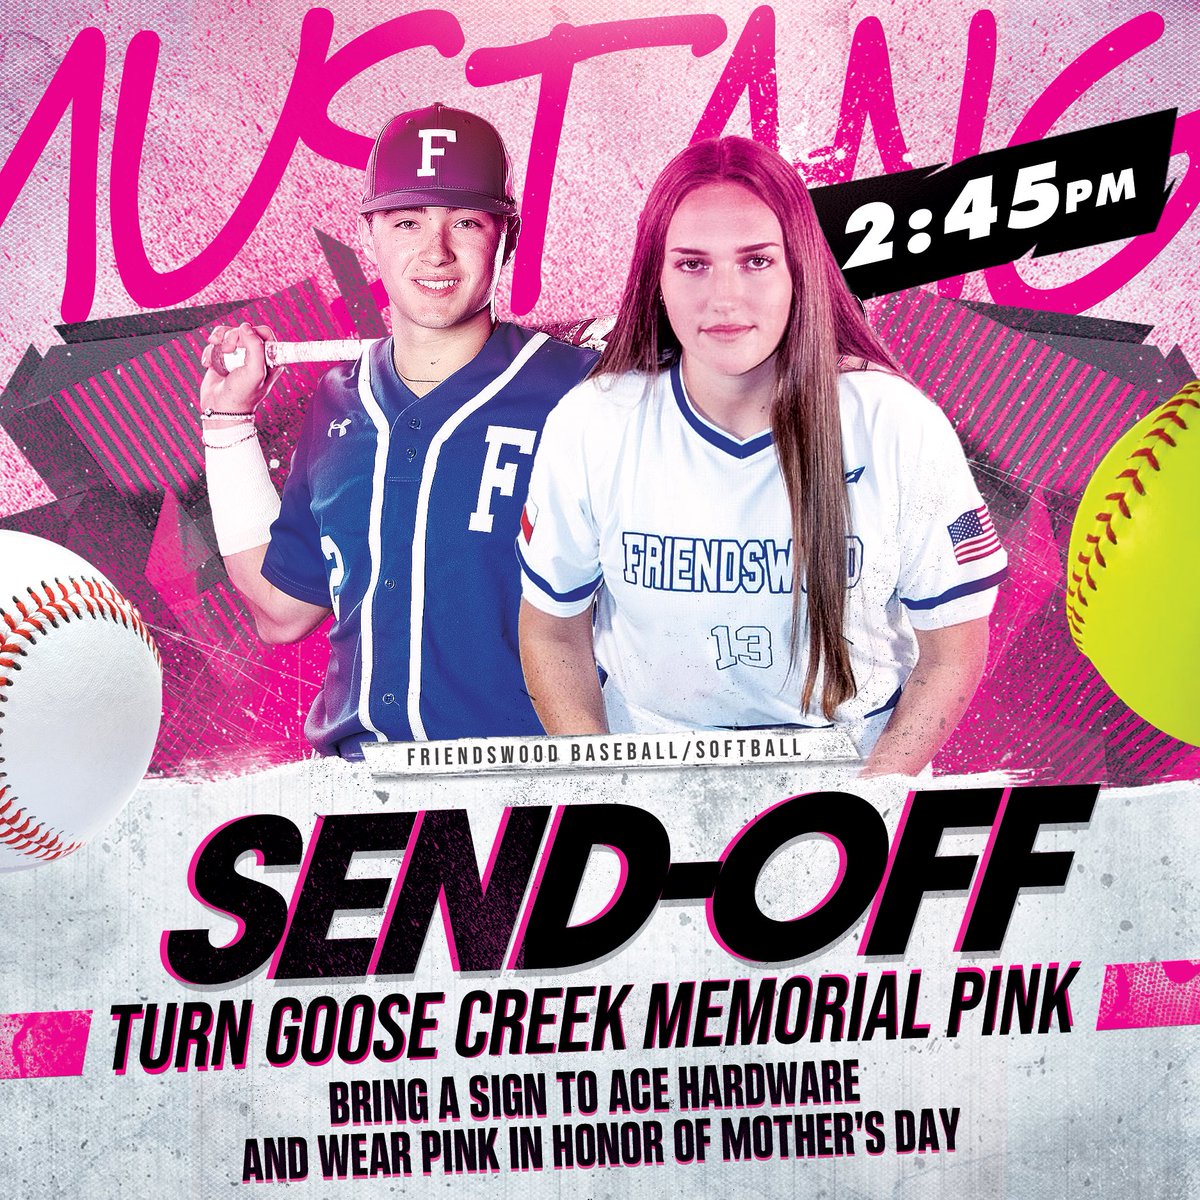 FRIDAY MAY 12TH

Let’s turn Goosecreek Memorial PINK in honor of Mother’s Day!!!

Friendswood Playoff Games:
📍Goose Creek Memorial
🥎 : 6:30 PM
⚾️ : 7 PM

WEAR PINK 

*Send off at FW Ace Hardware for        BOTH*
🥎 2:45 PM ⚾️
 BE THERE!!!!